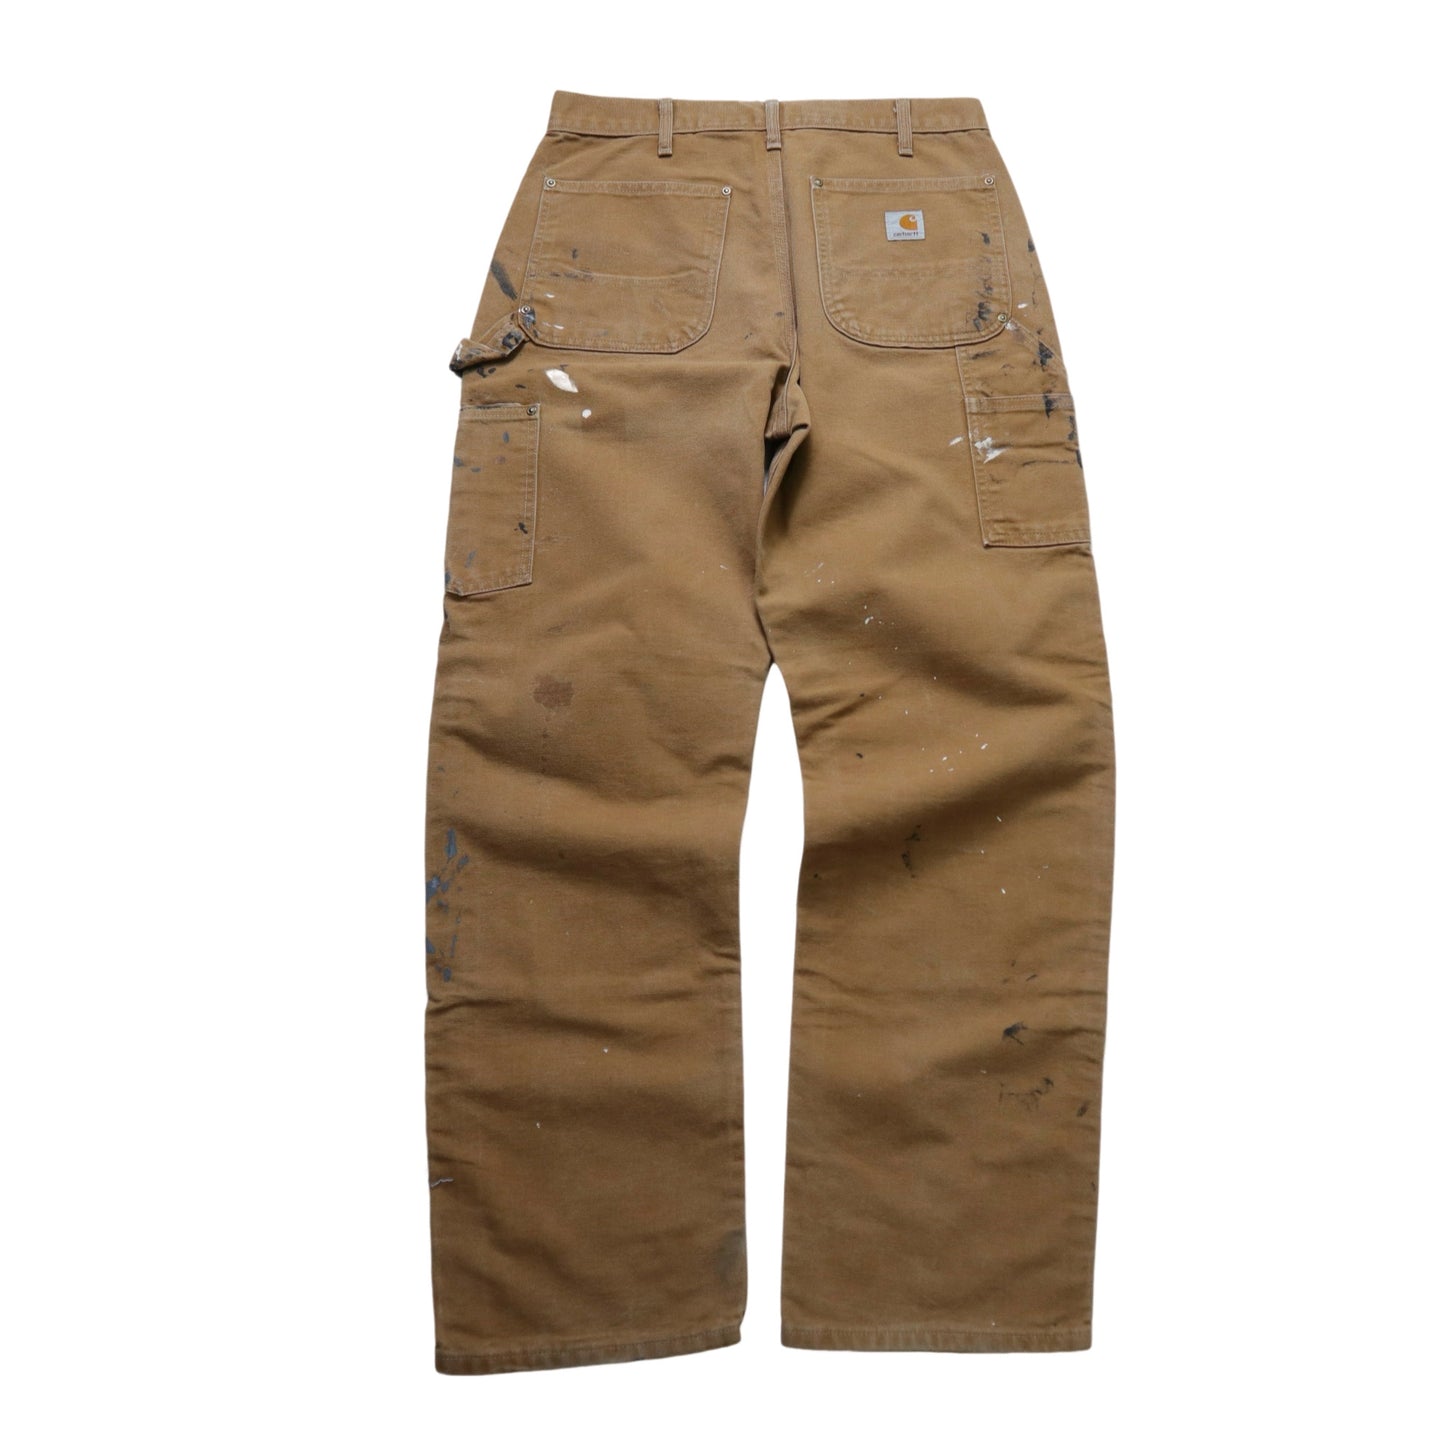 (31W) American-made Carhartt double knee brown paint-splashed work pants